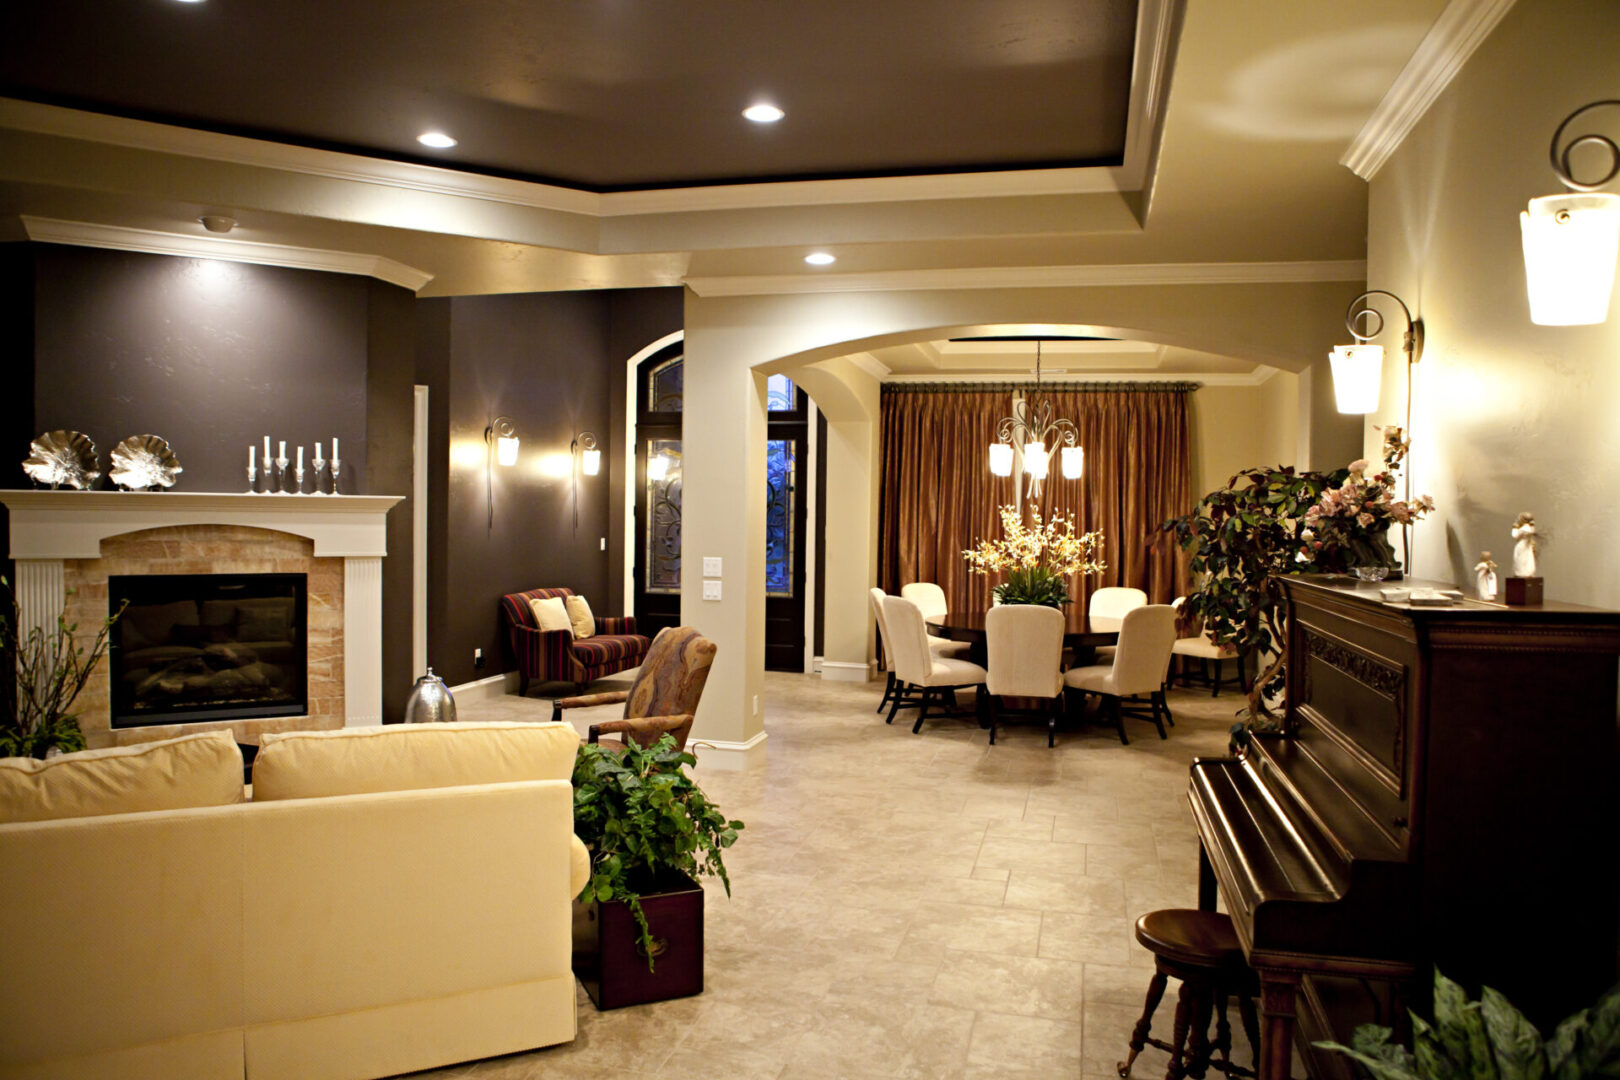 Lounge area with fireplace and piano